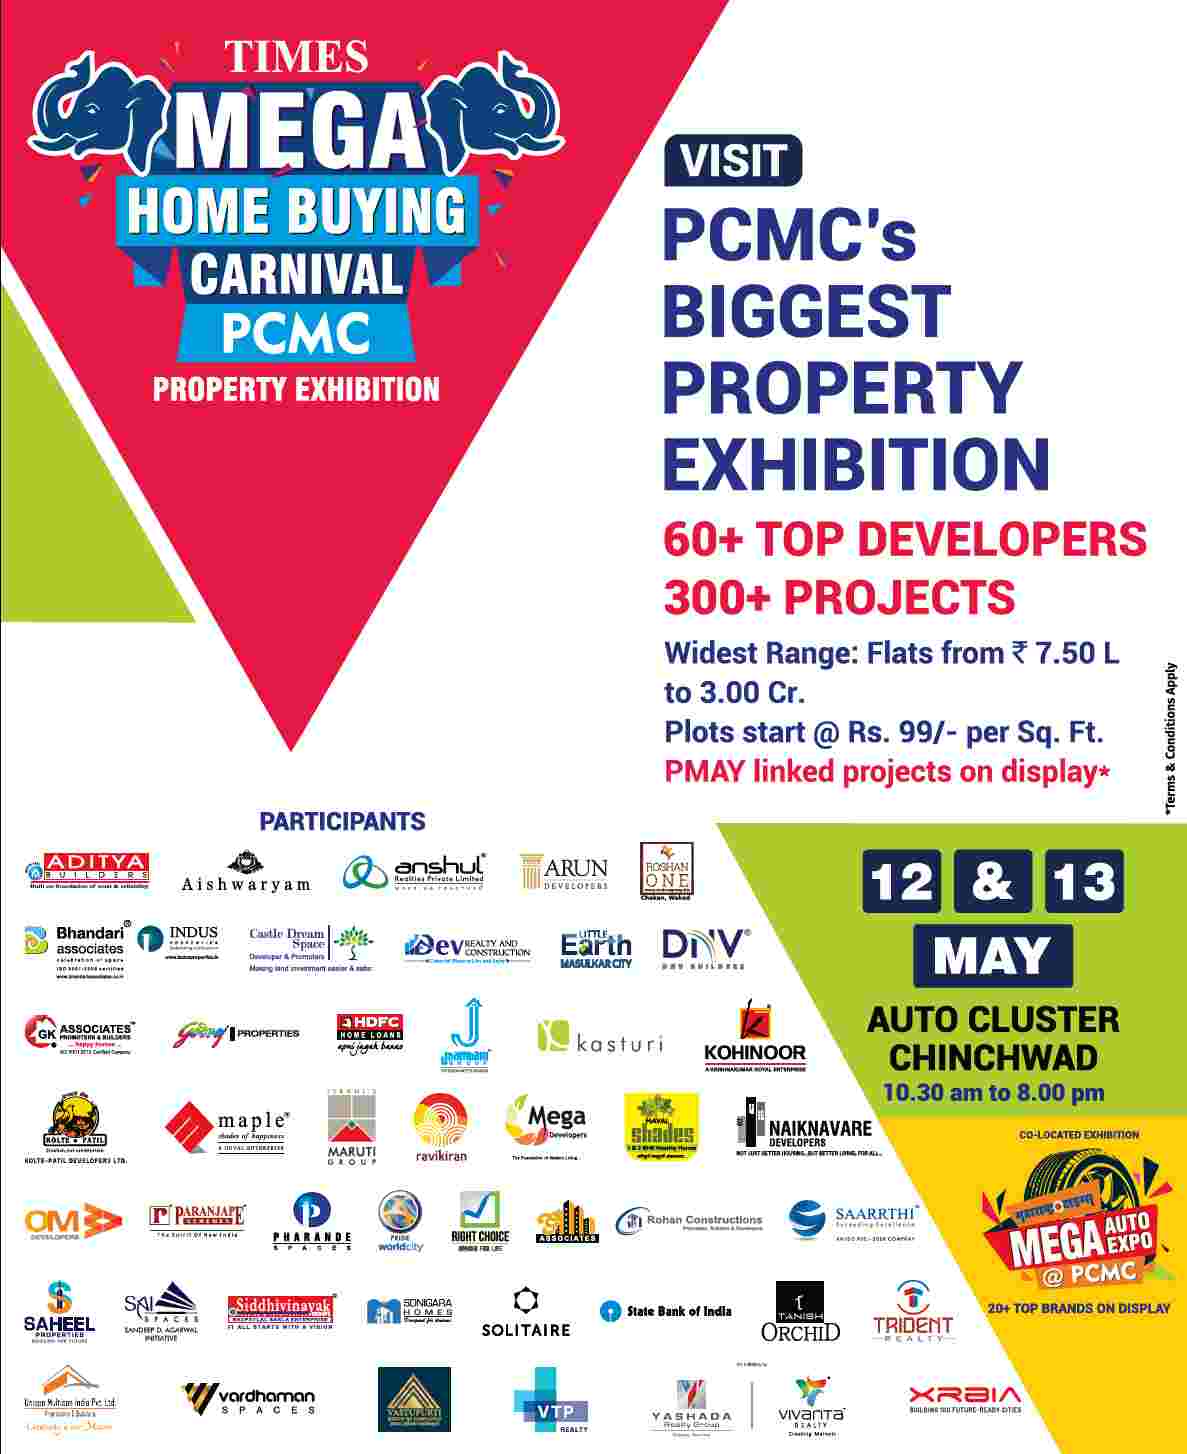 Times Mega Home Buying Carnival 2018 in Pune Update